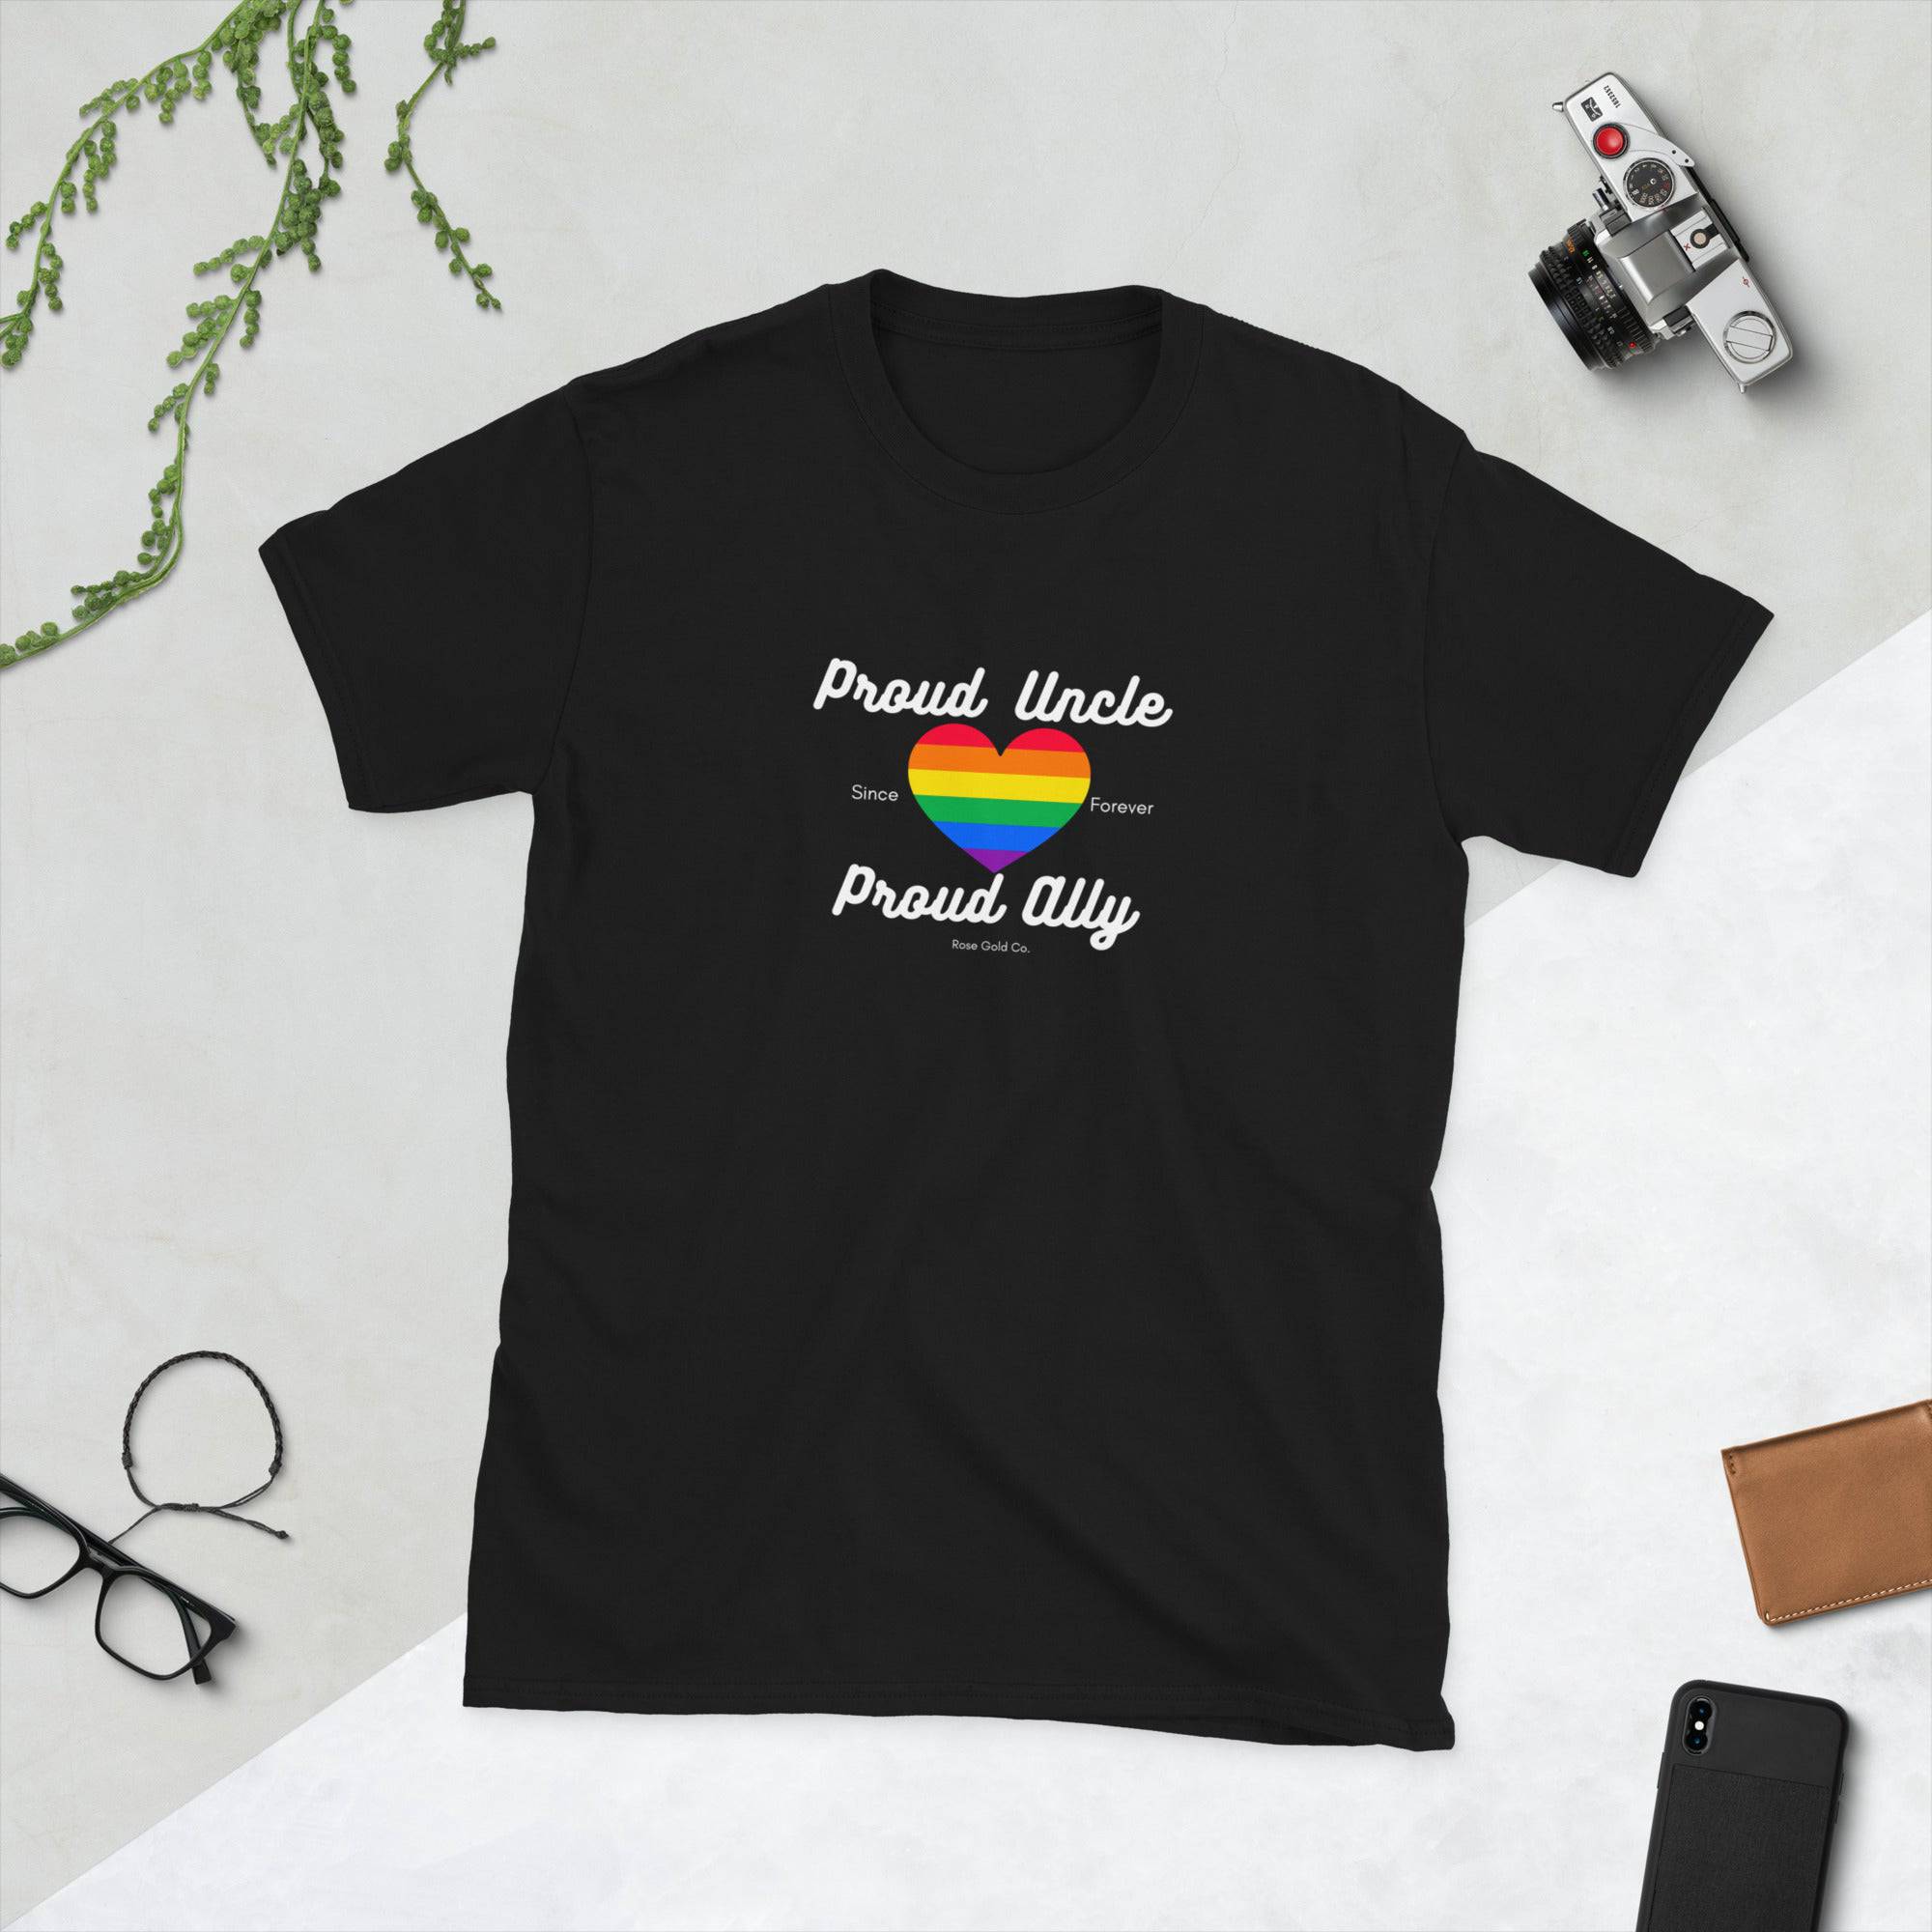 Proud Uncle Ally Pride Short-Sleeve Unisex T-Shirt